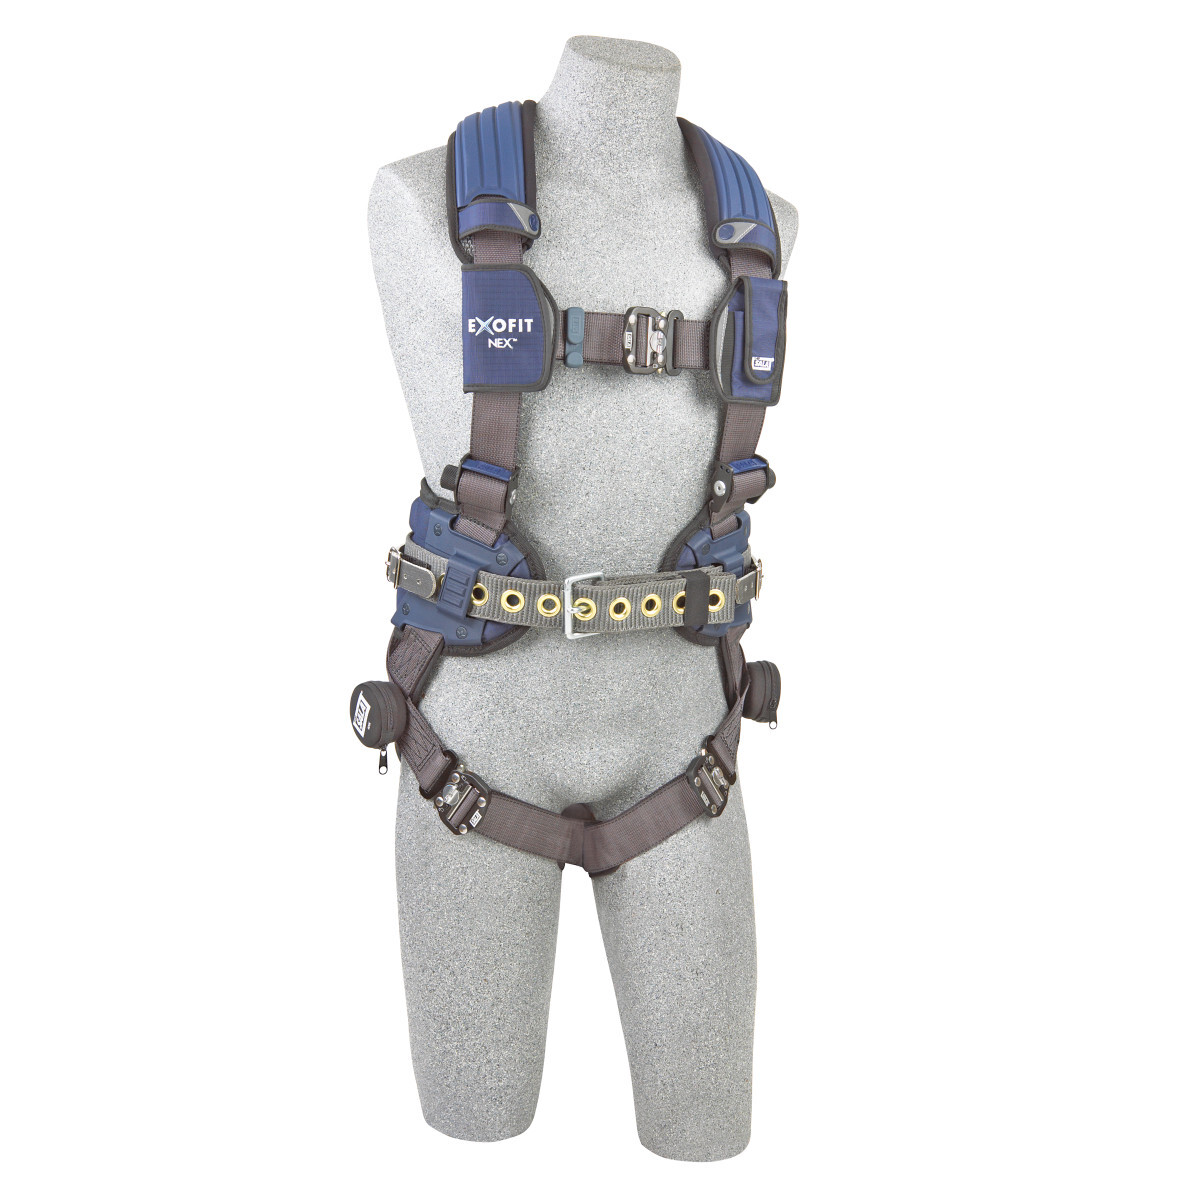 3M™ DBI-SALA® Small ExoFit NEX™ Full Body/Vest Style Harness With Tech-Lite™ Aluminum Back D-Ring, Miner'S Belt With Pad And Sid